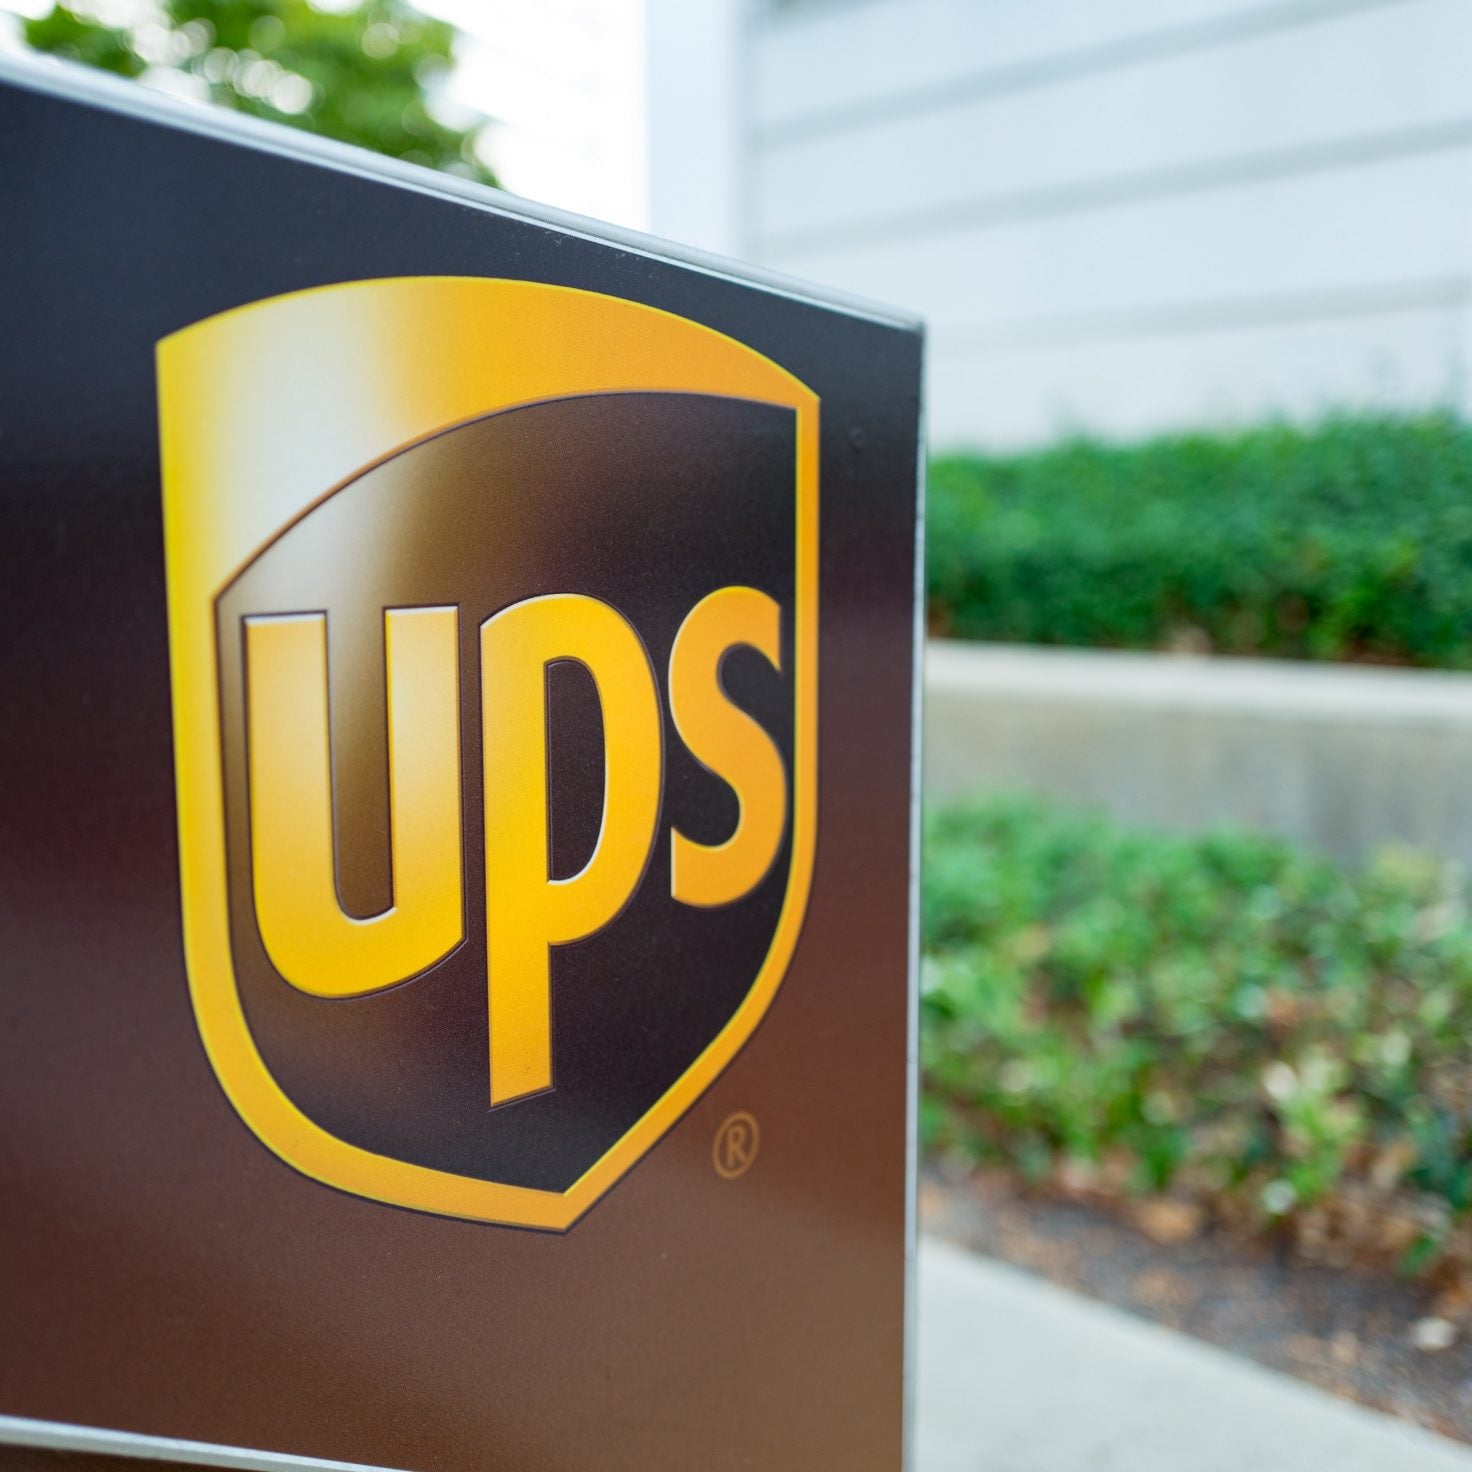 19 UPS Workers Sue Company For Enabling and Encouraging 'Culture of Racism'